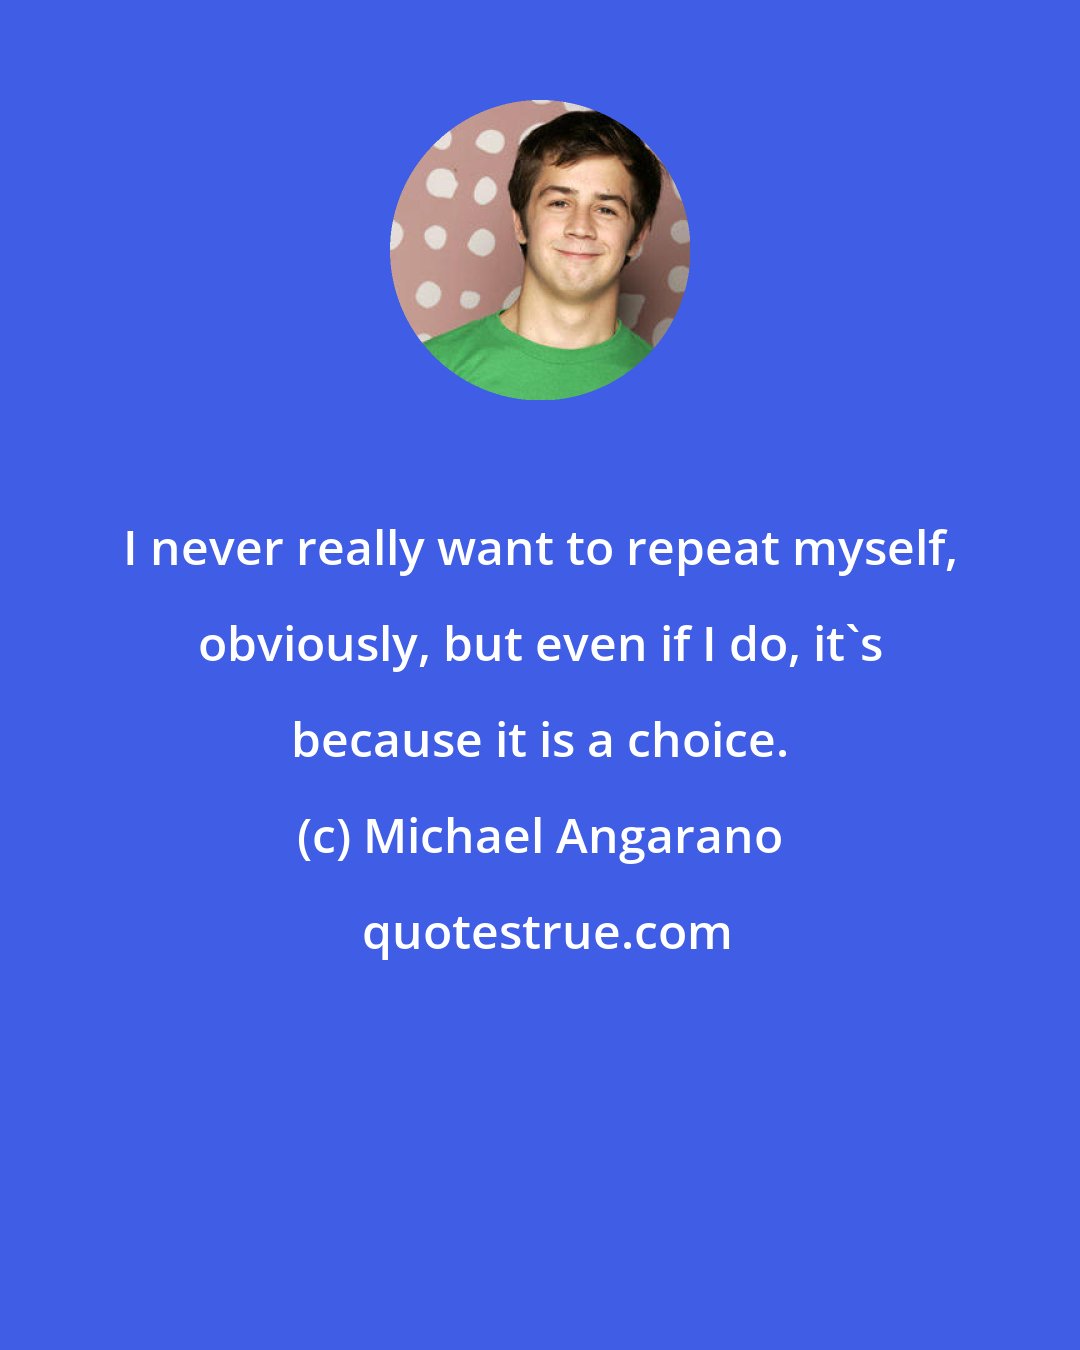 Michael Angarano: I never really want to repeat myself, obviously, but even if I do, it's because it is a choice.